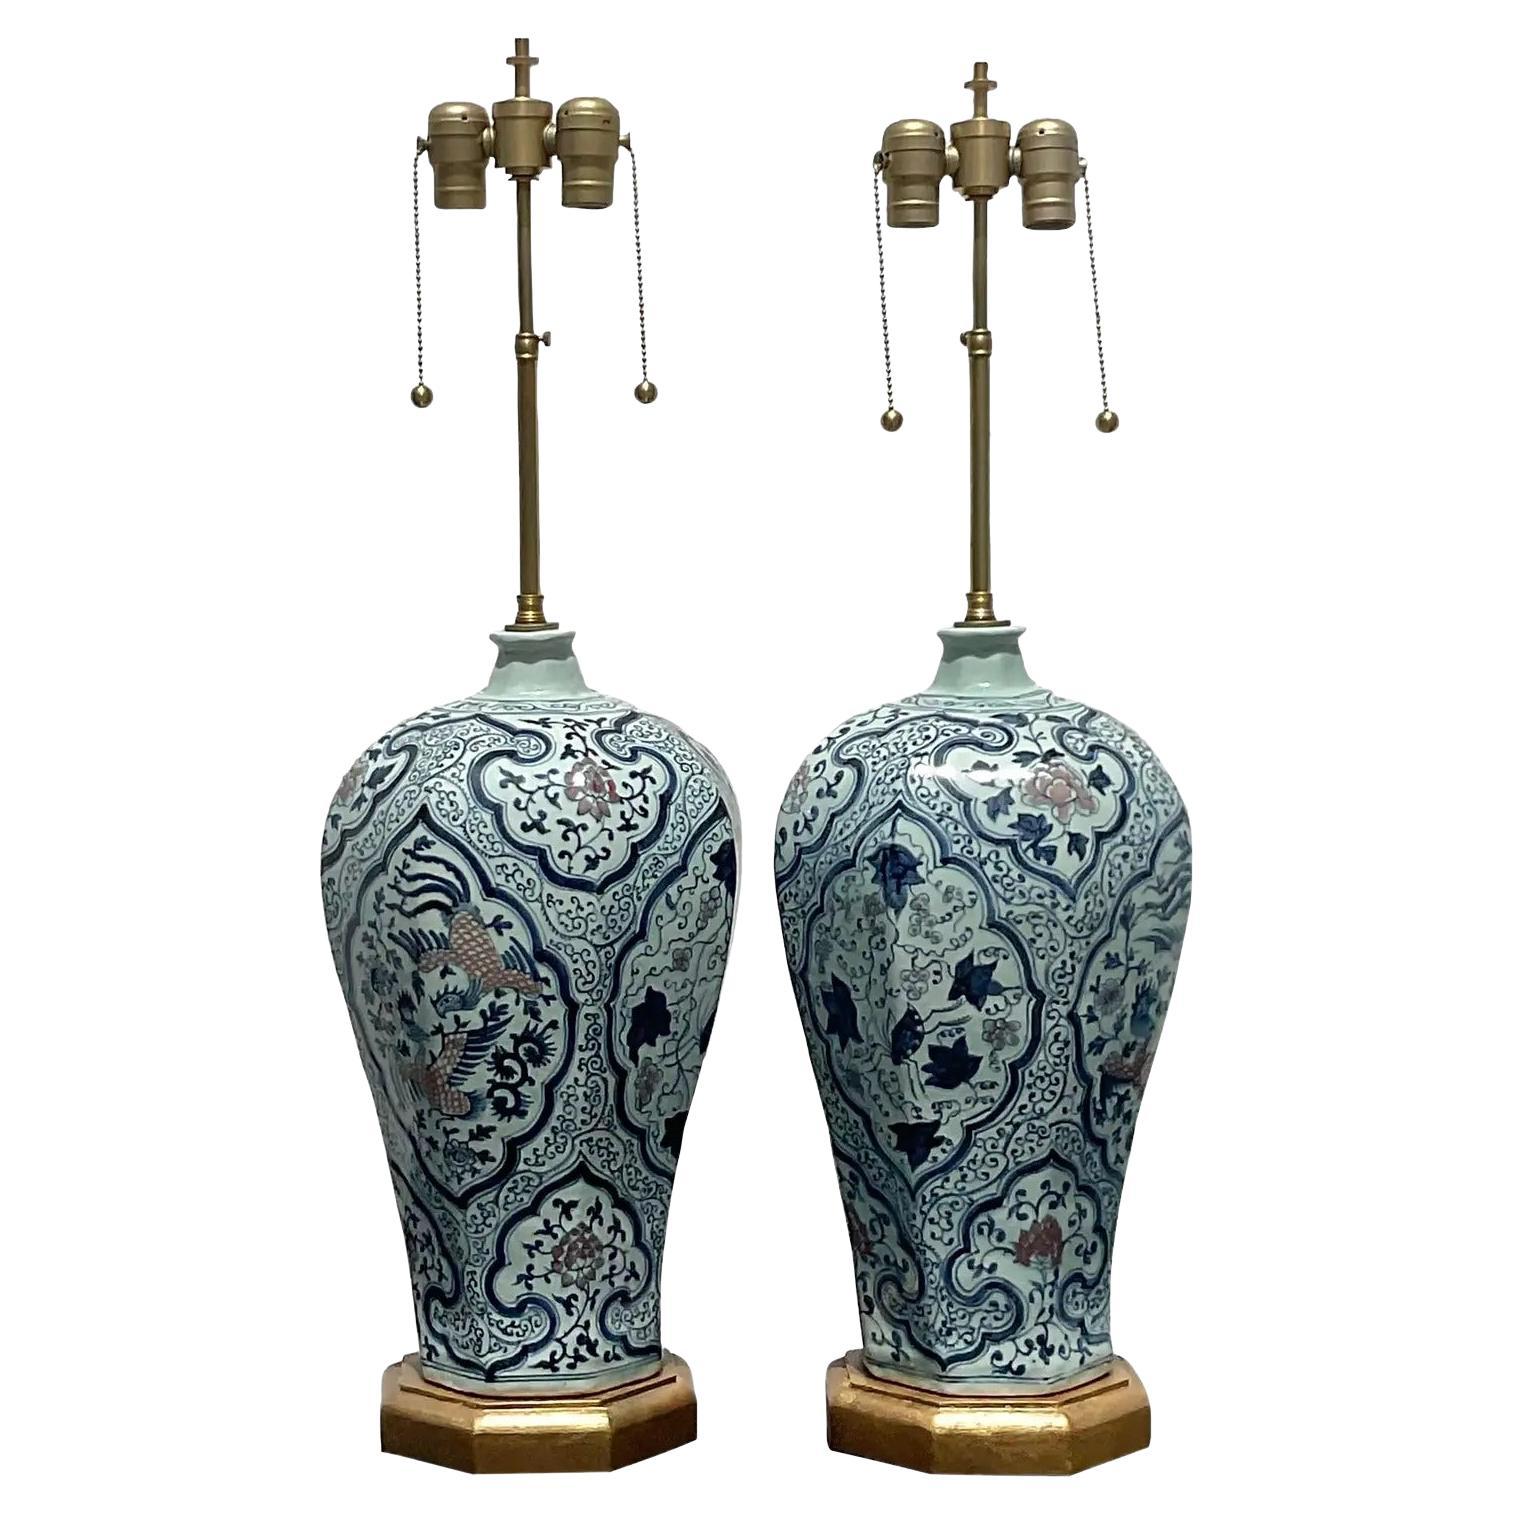 Vintage Asian Blue and White Glazed Ceramic Lamps, a Pair